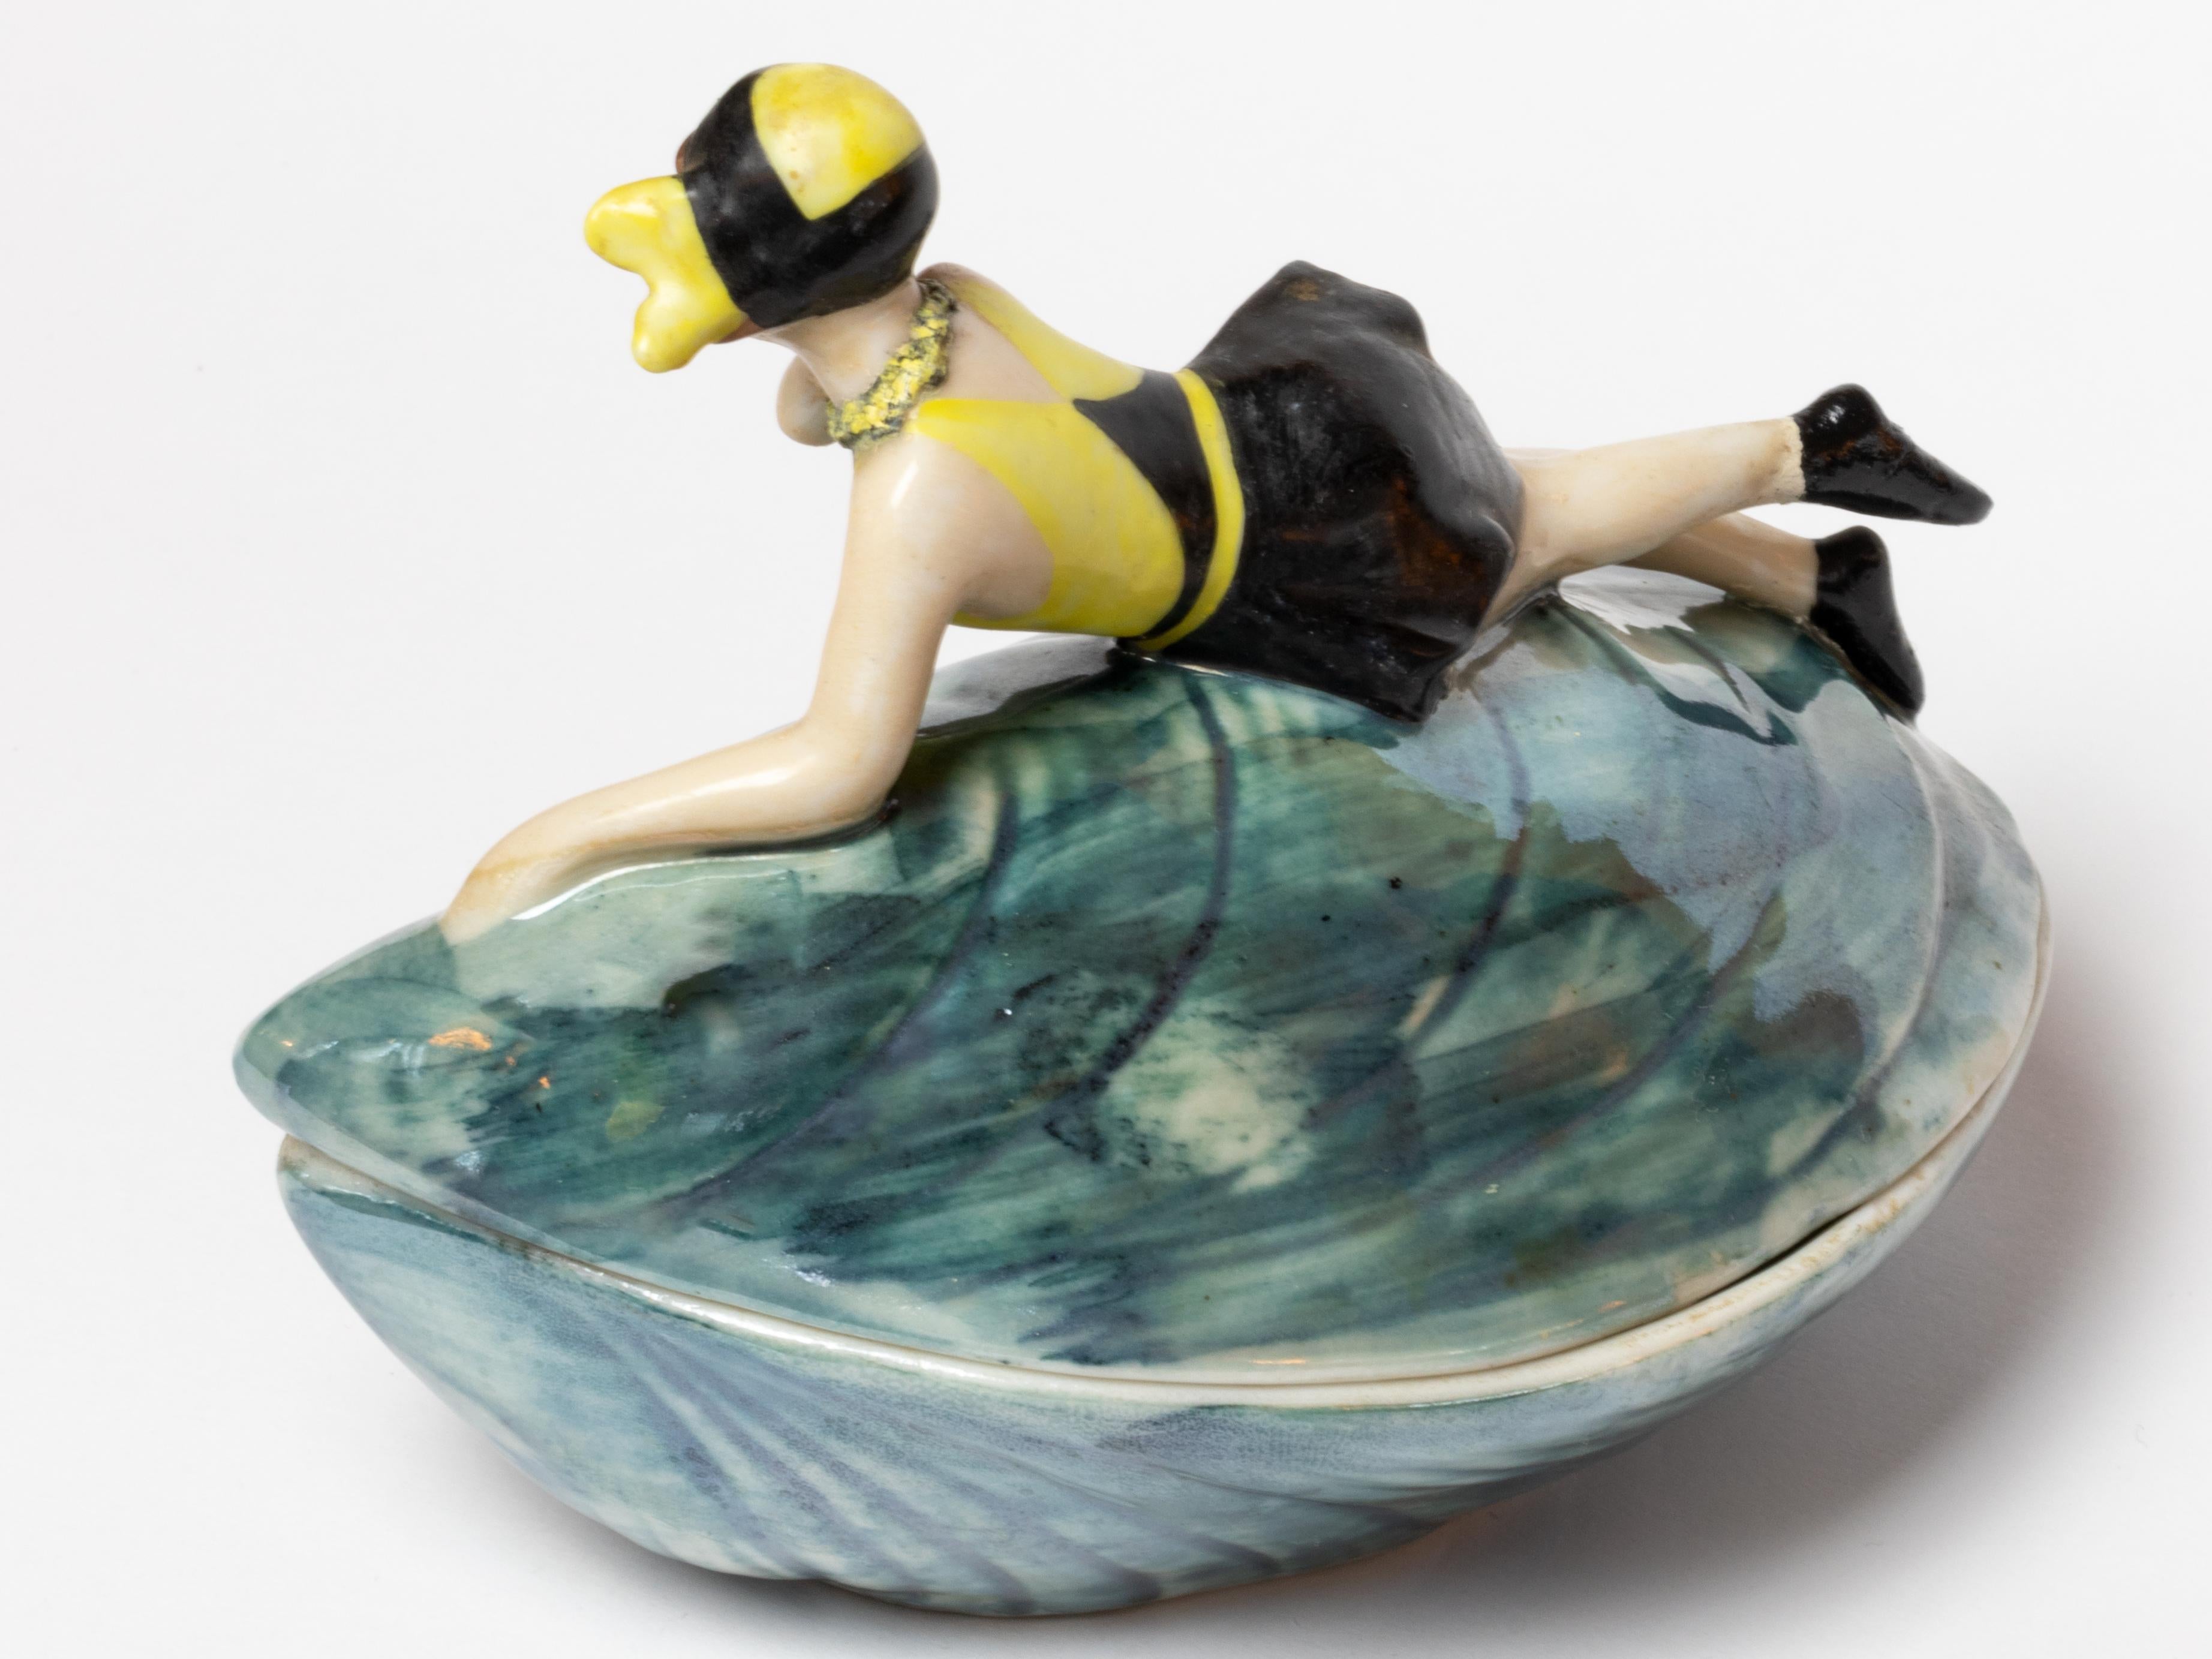 20th Century Art Deco Mussel Shell Rice Powder Box Pin Up Woman Porcelain by Goebel, 1929 For Sale